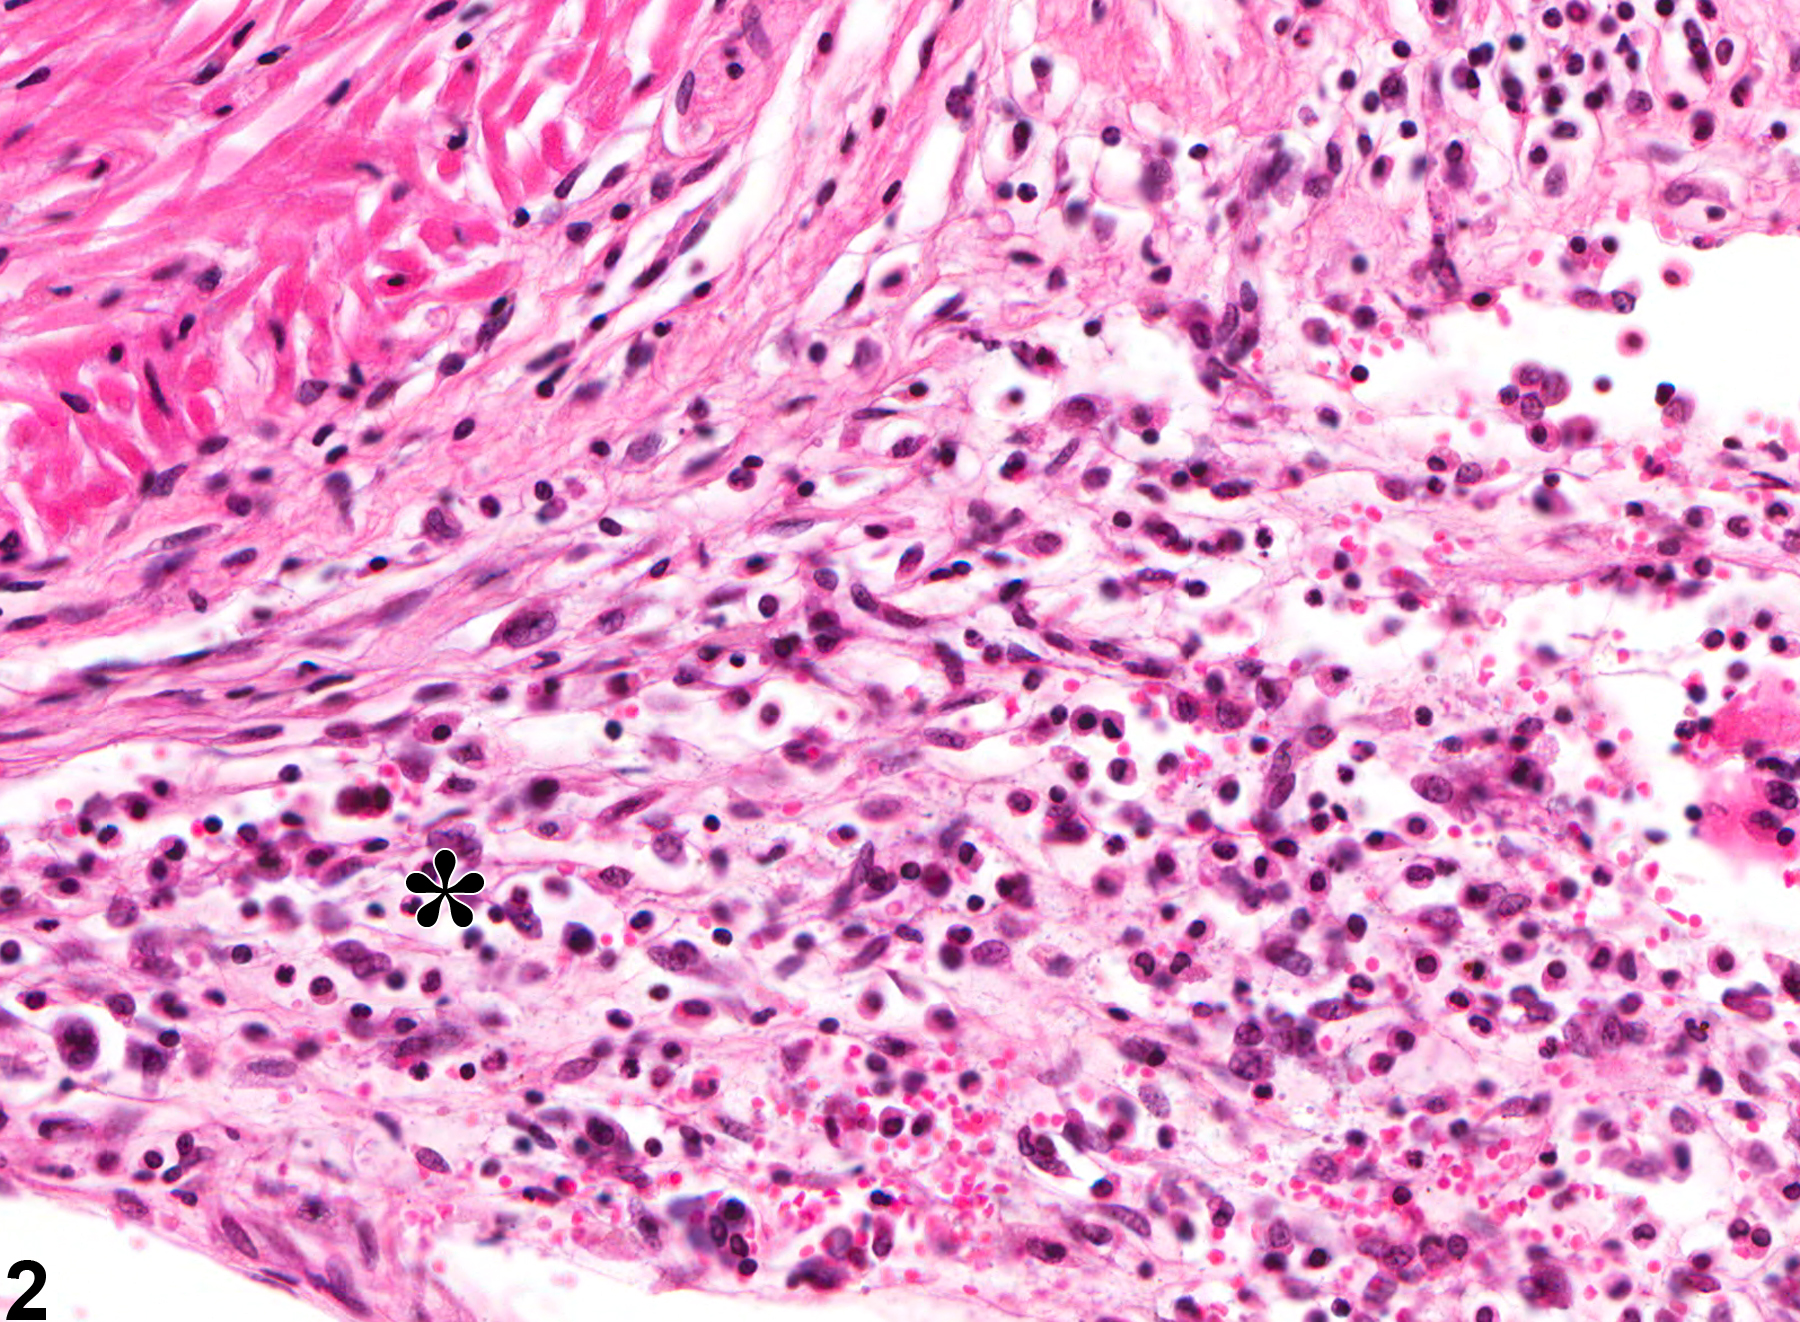 Image of inflammation in the ductus deferens from a male B6C3F1 mouse in a chronic study